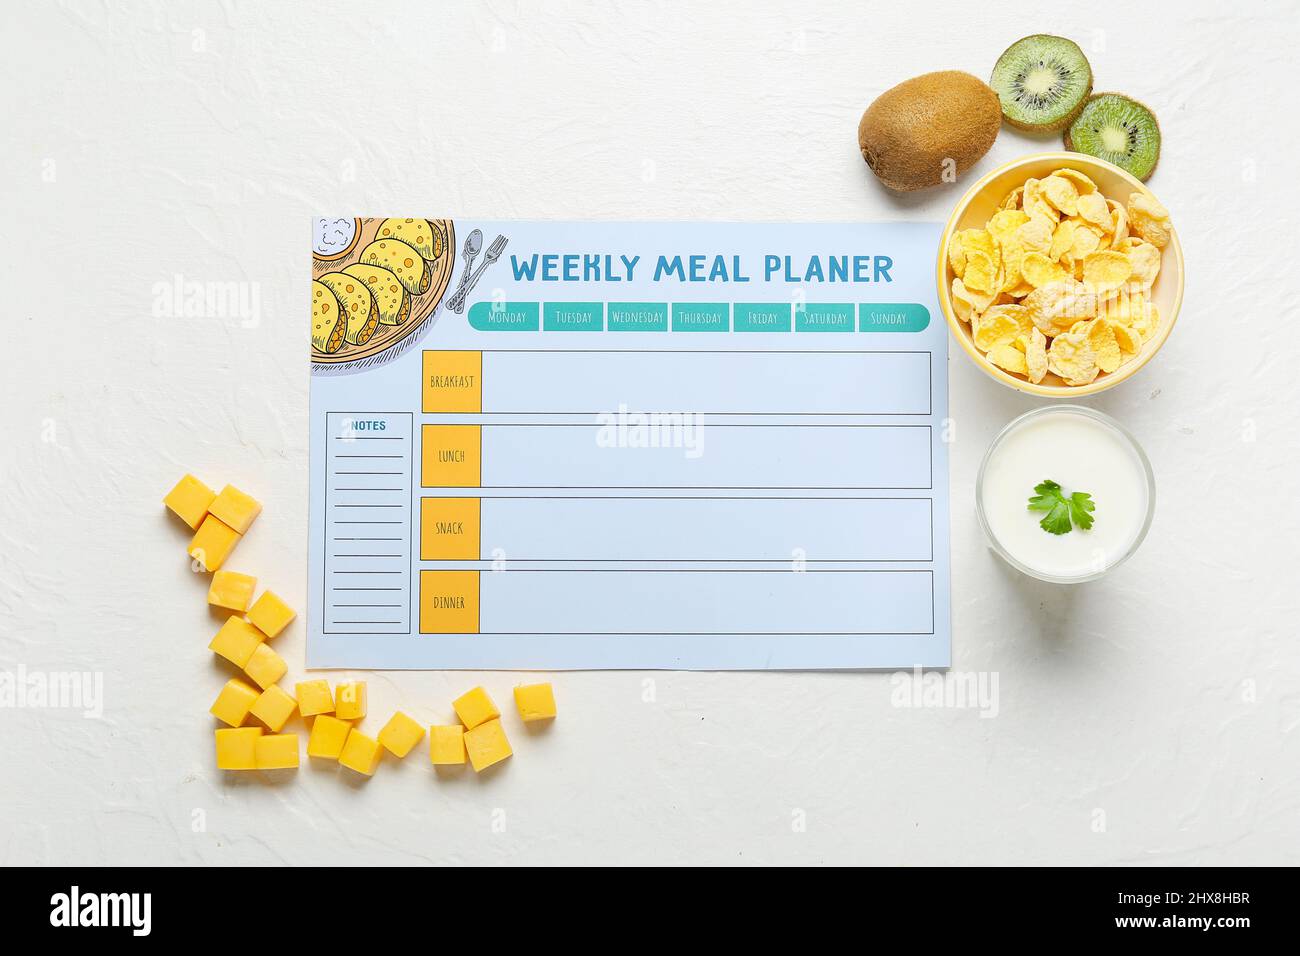 Weekly meal planner and different healthy products on light background Stock Photo